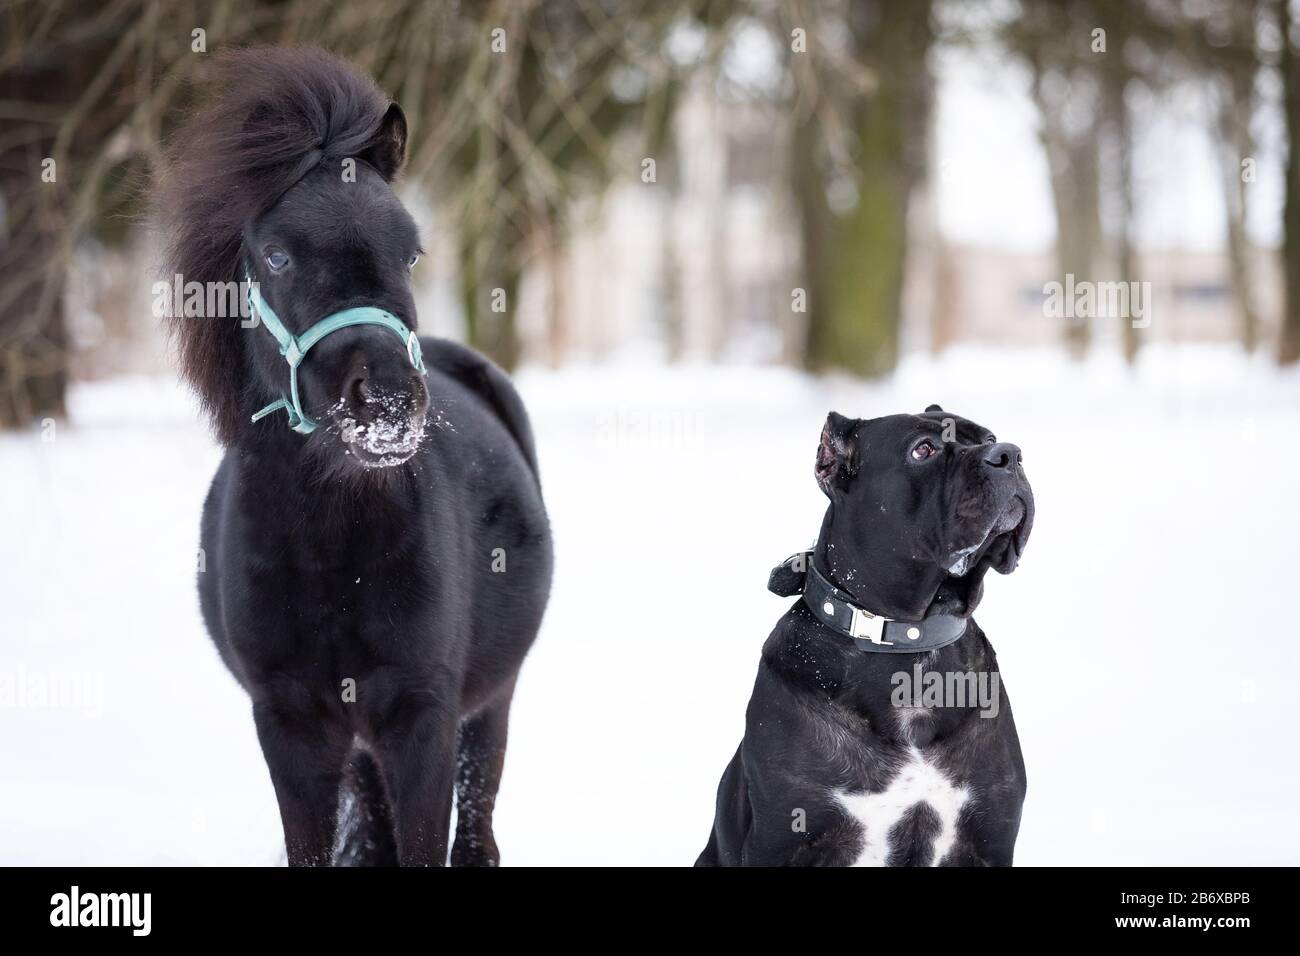 Black pony with dog walks outdoor at winter day Stock Photo